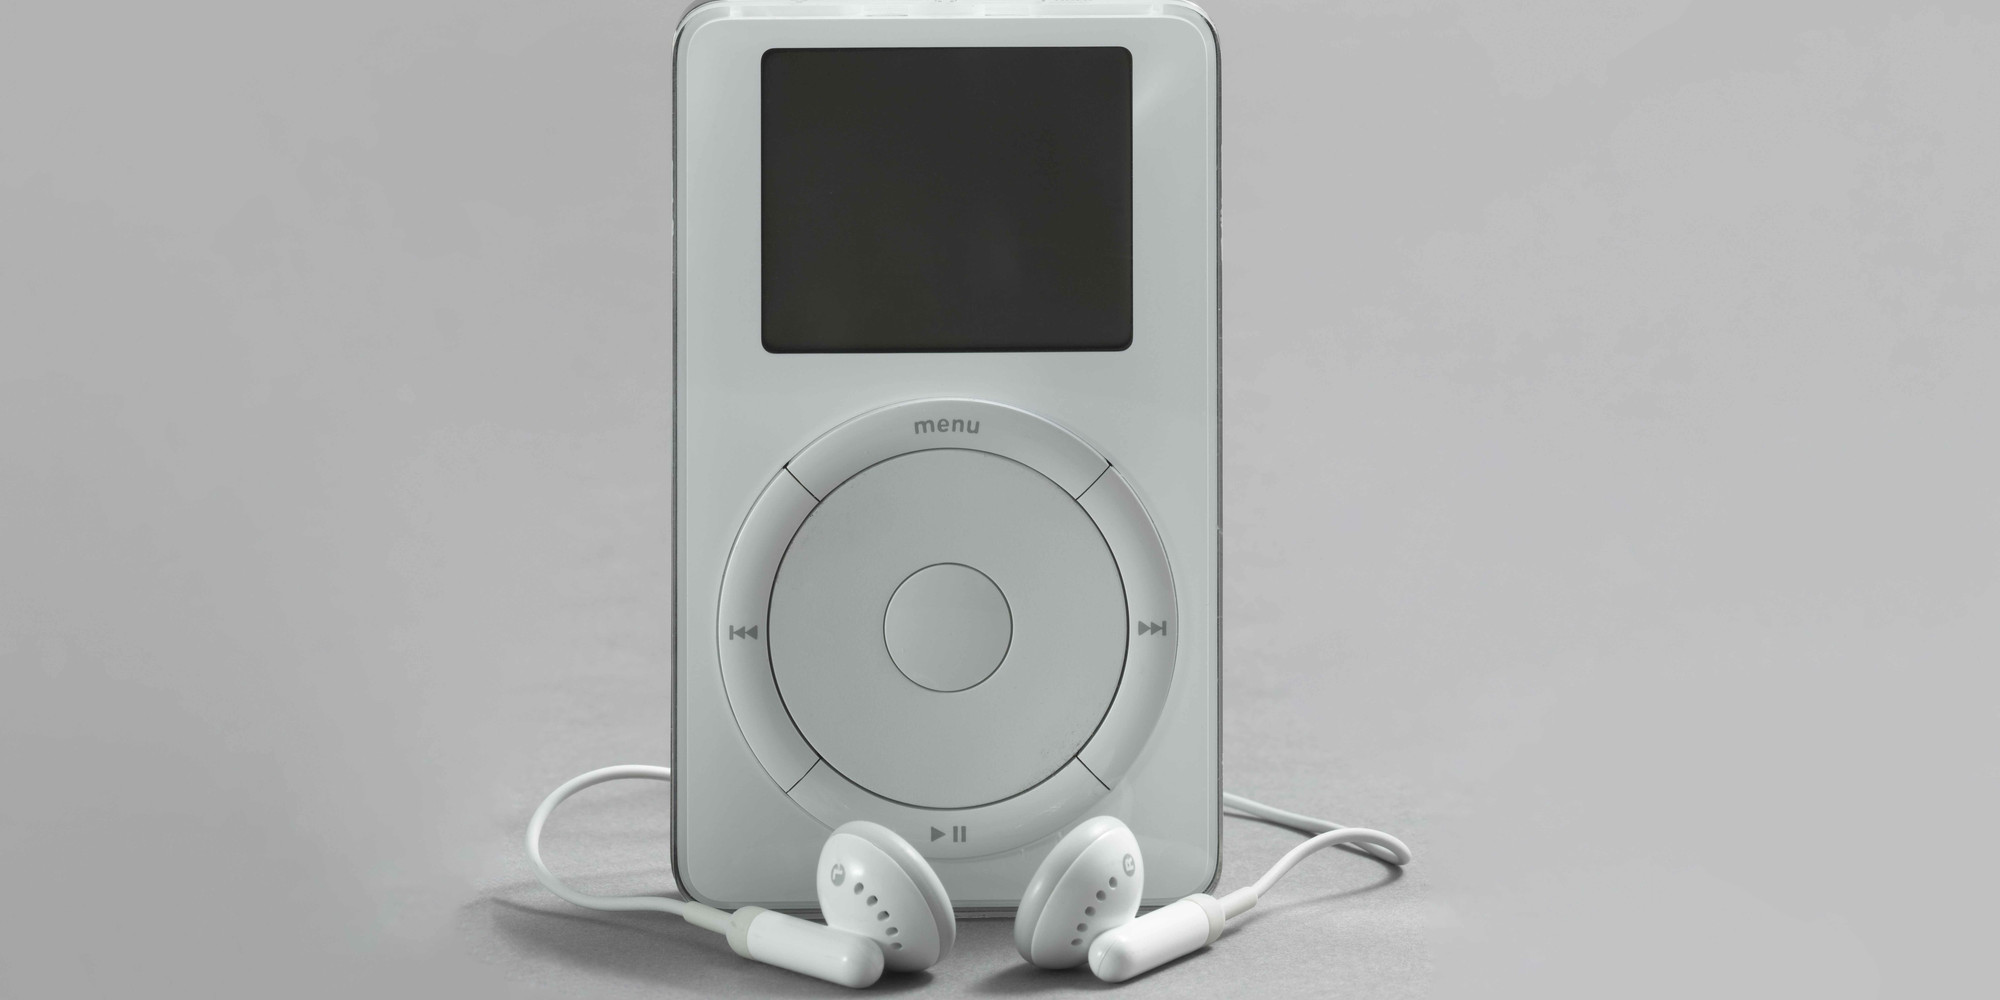 Jonathan Ive, Apple Industrial Design Group. iPod. 2001. Polycarbonate plastic and stainless steel, 4 × 2 1/2 × 7/8&#34; (10.2 × 6.4 × 2.2 cm). Manufactured by Apple, Inc. The Museum of Modern Art, New York. Gift of the manufacturer